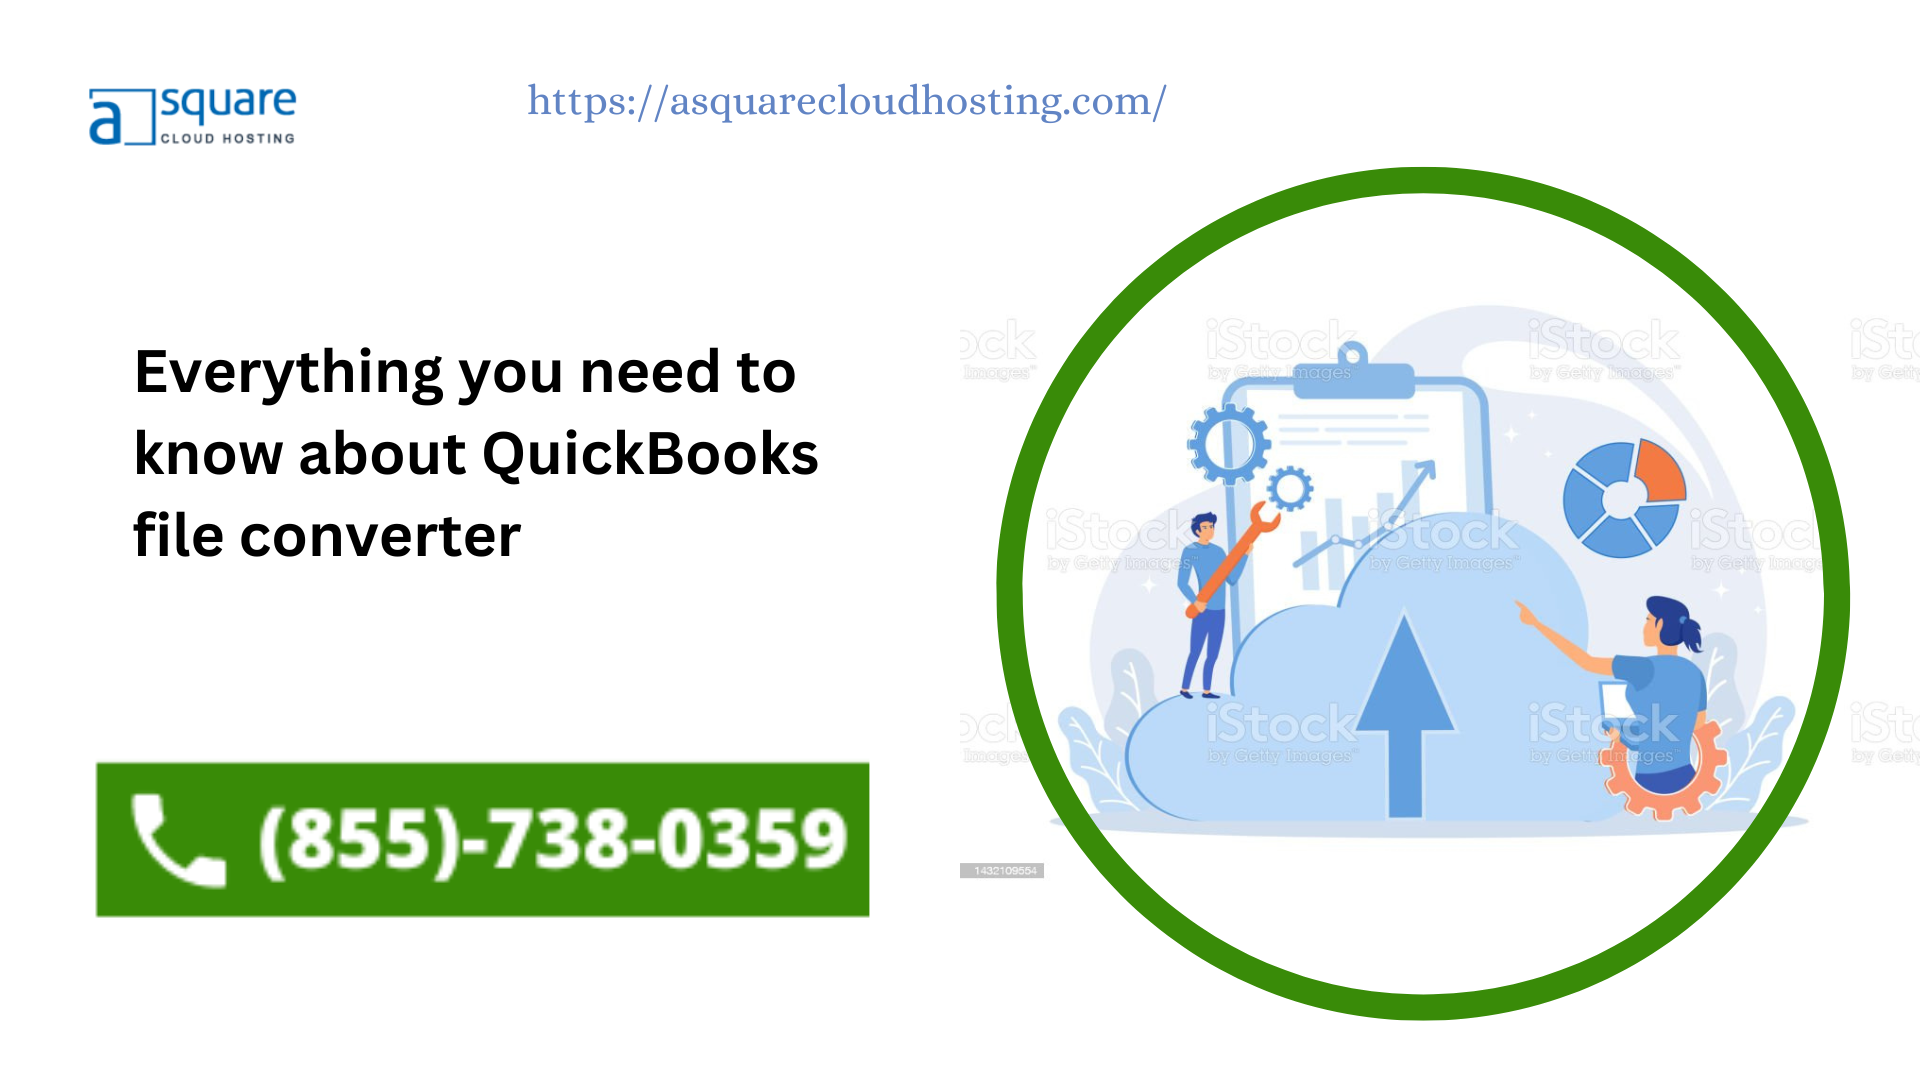 Everything you need to know about QuickBooks file converter